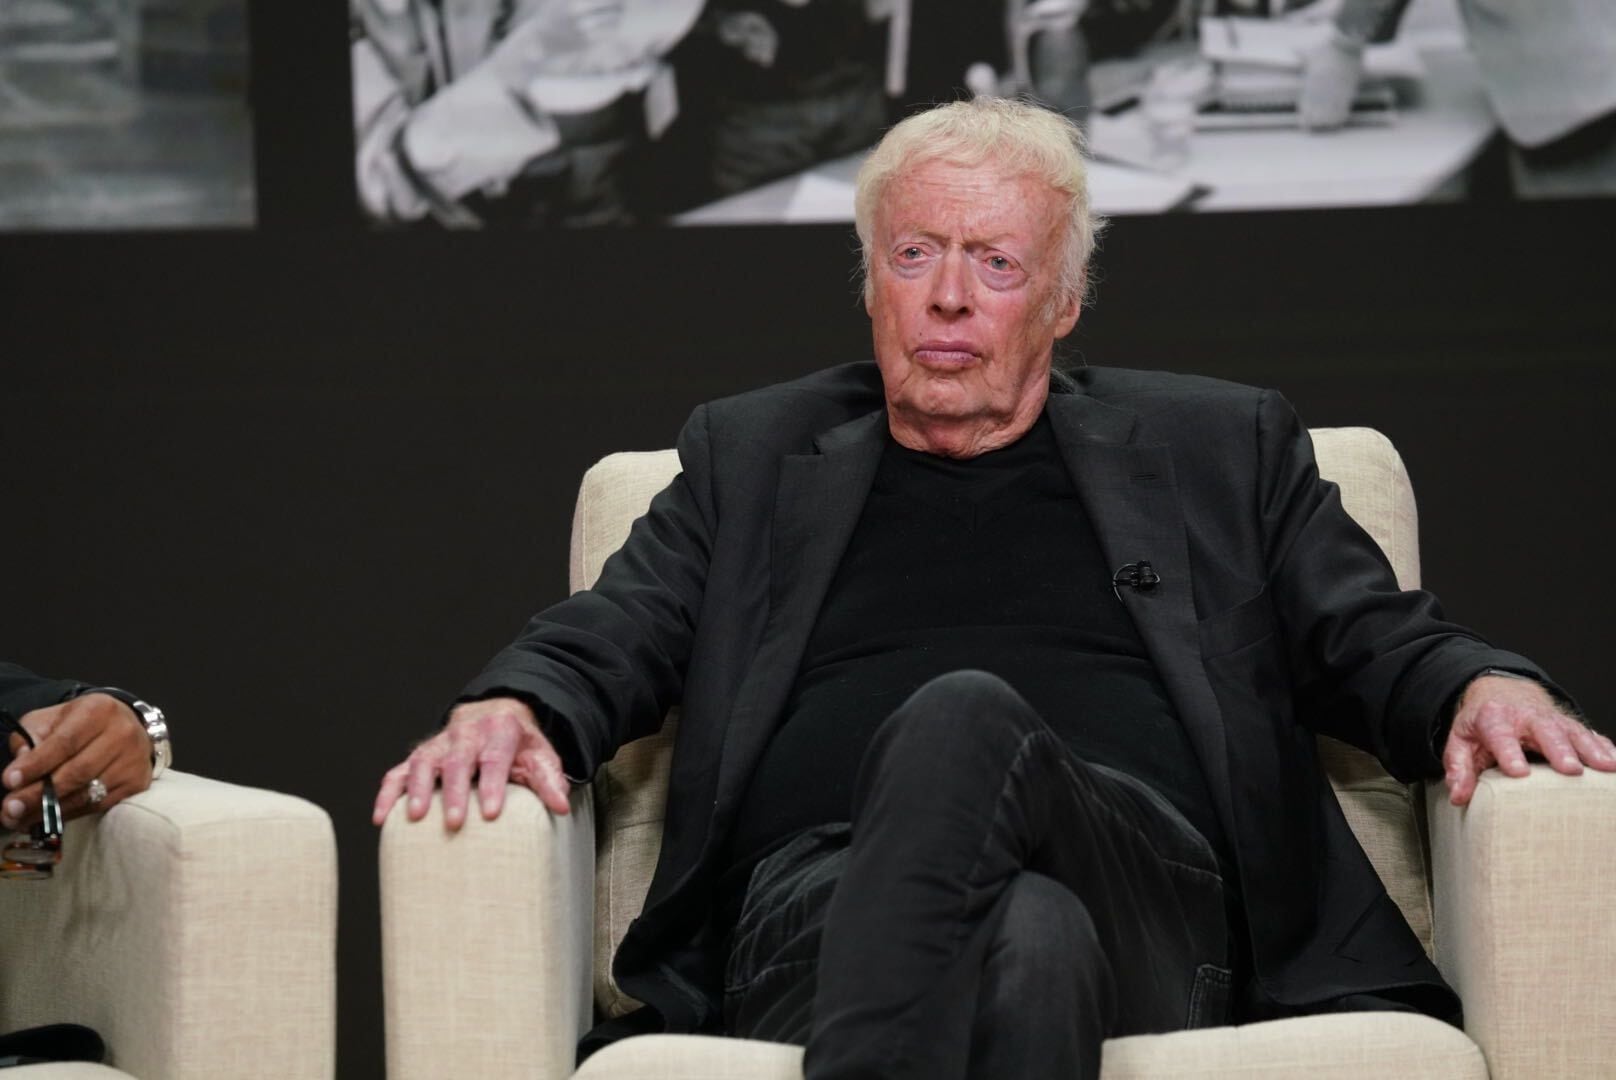 Phil Knight gives $400M to Black Portlanders - OPB